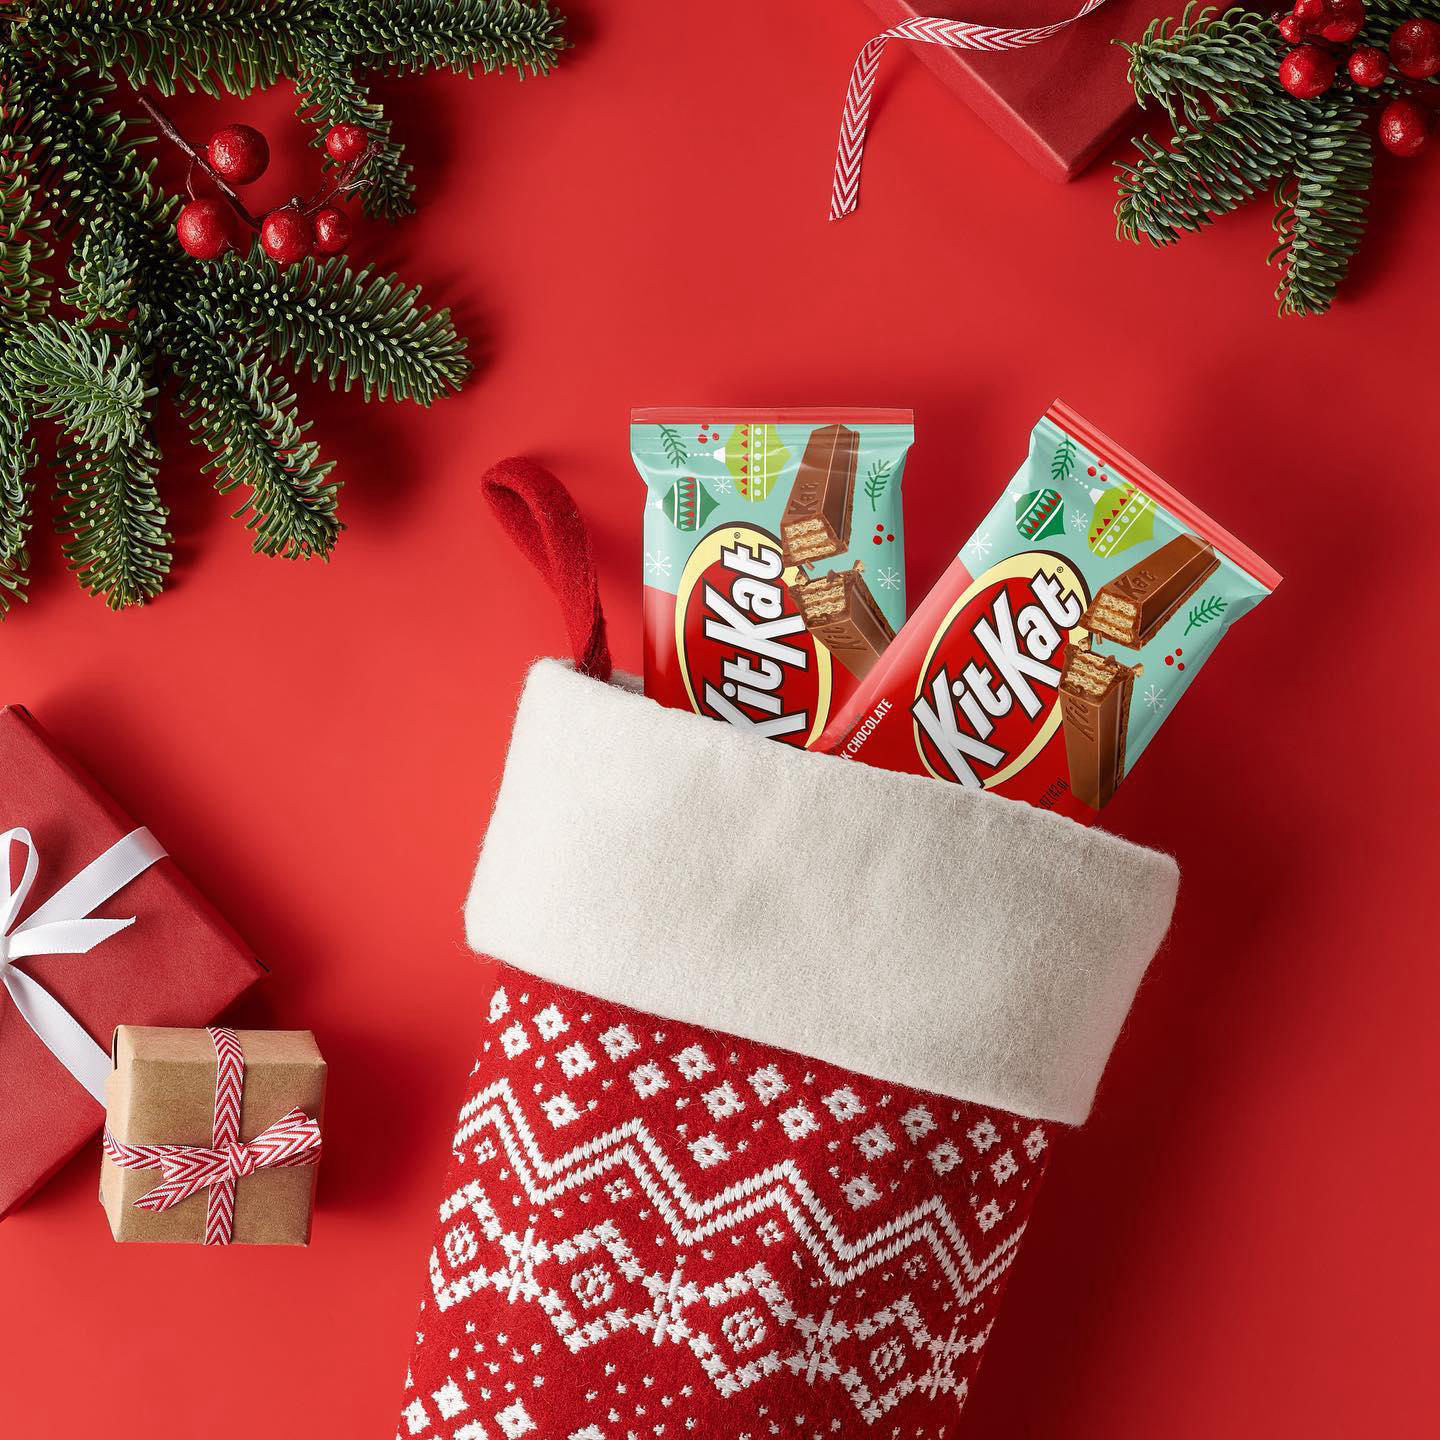 Kit Kat - A stocking stuffer that will make days happy and bright